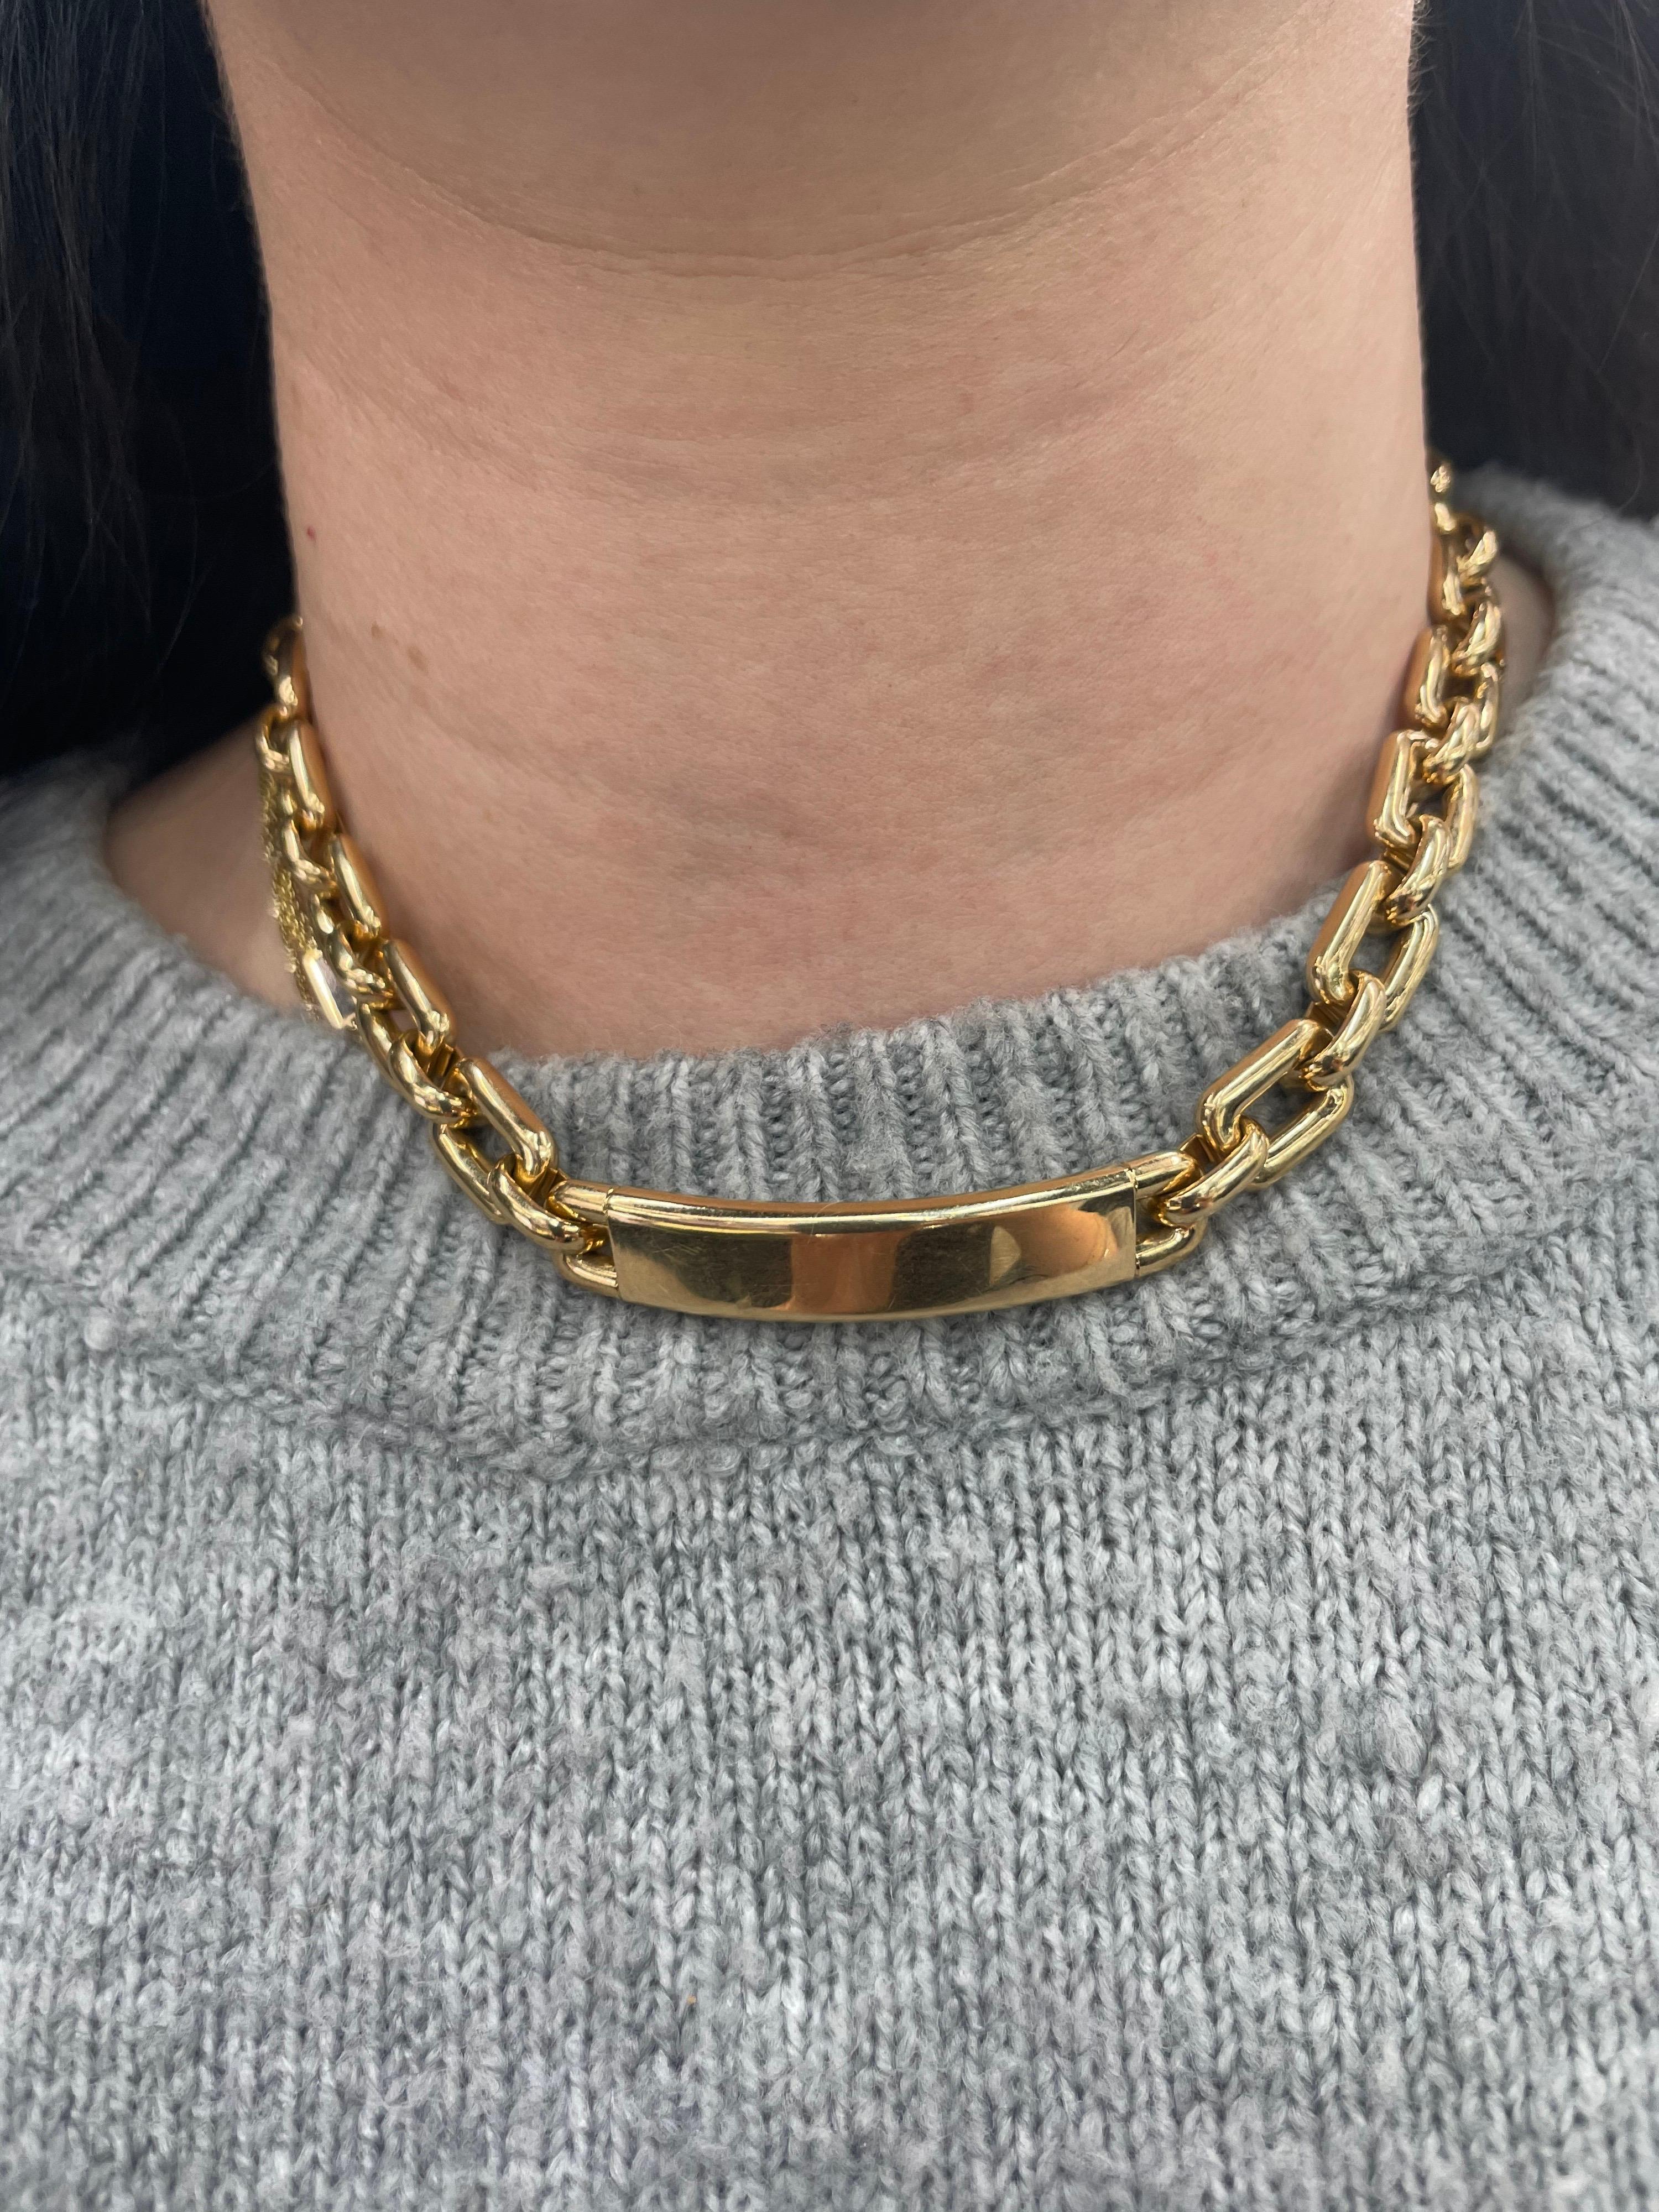 From 'The Chunky Chain Collection' this Ralph Lauren ID Necklace is crafted in 18 karat rose gold and weighs 80.1 grams.
We can customize the ID Bar with diamonds, or engraving.
Very chic!